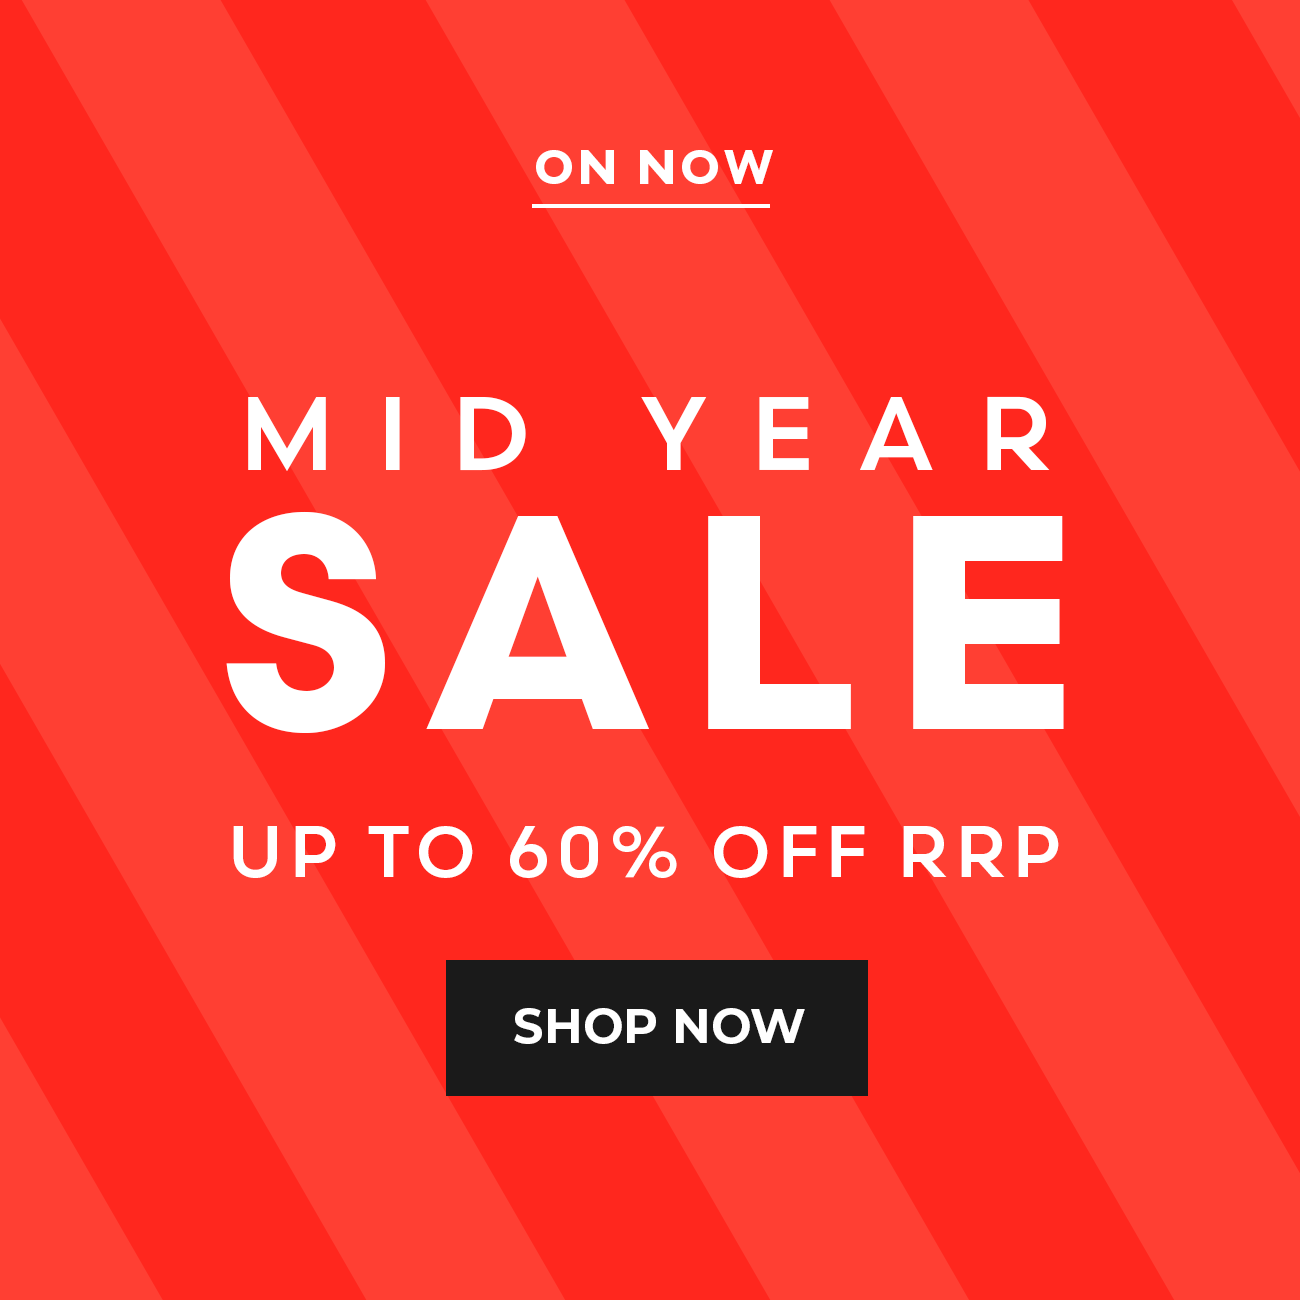 Mid Year Sale - Up to 60% OFF RRP